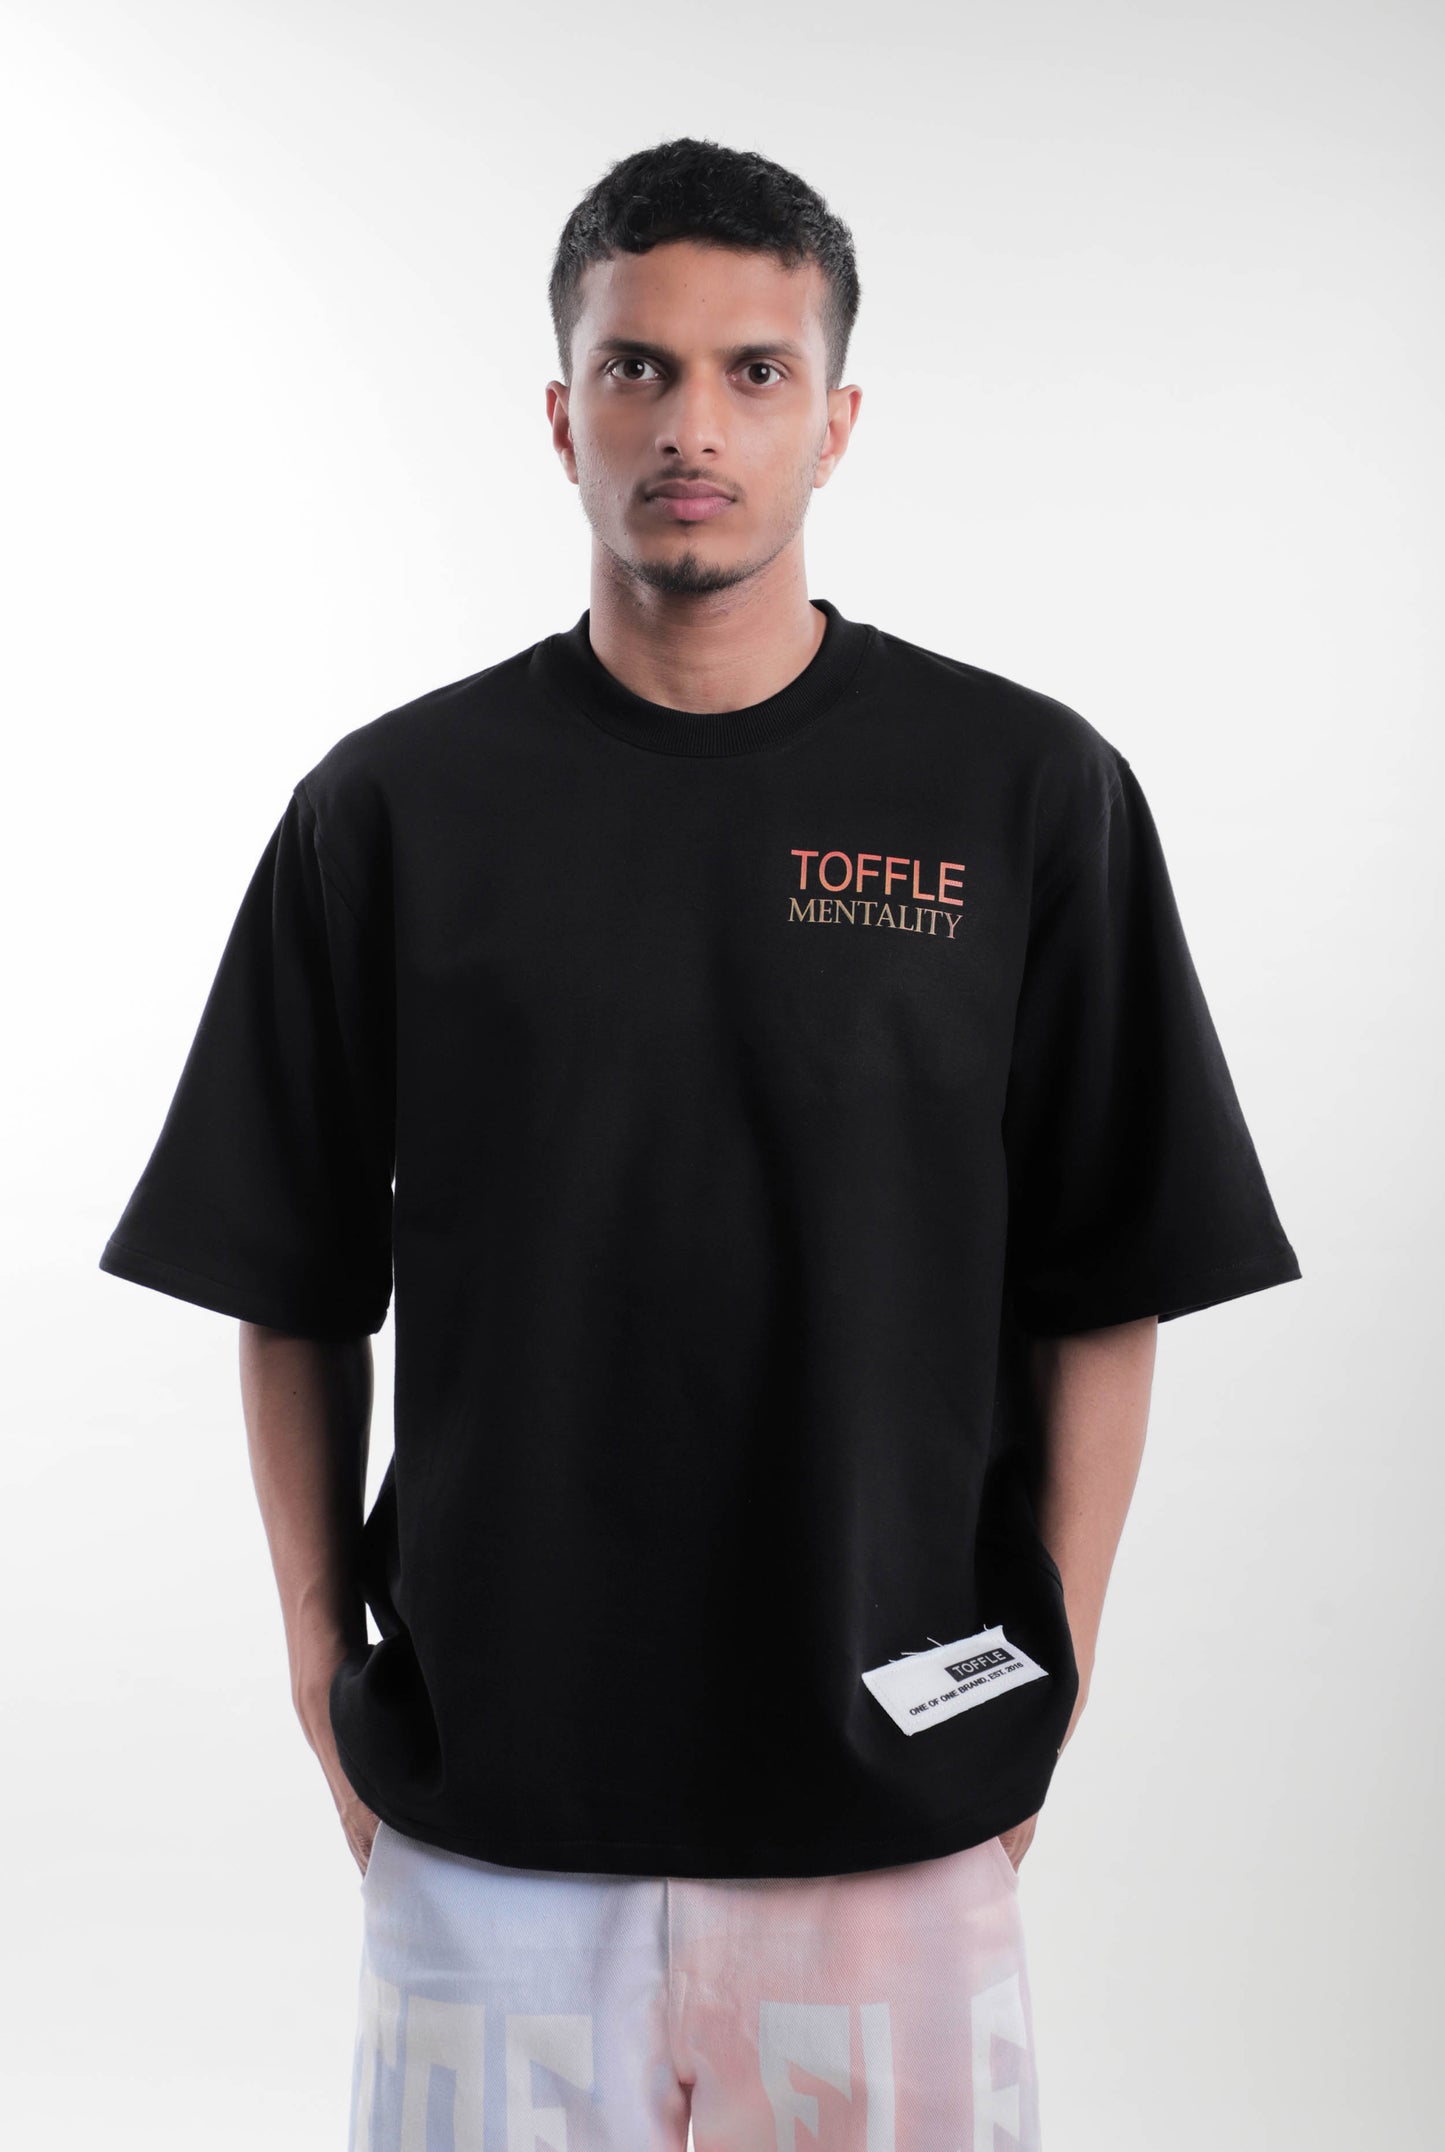 Toffle Mentality T-Shirt